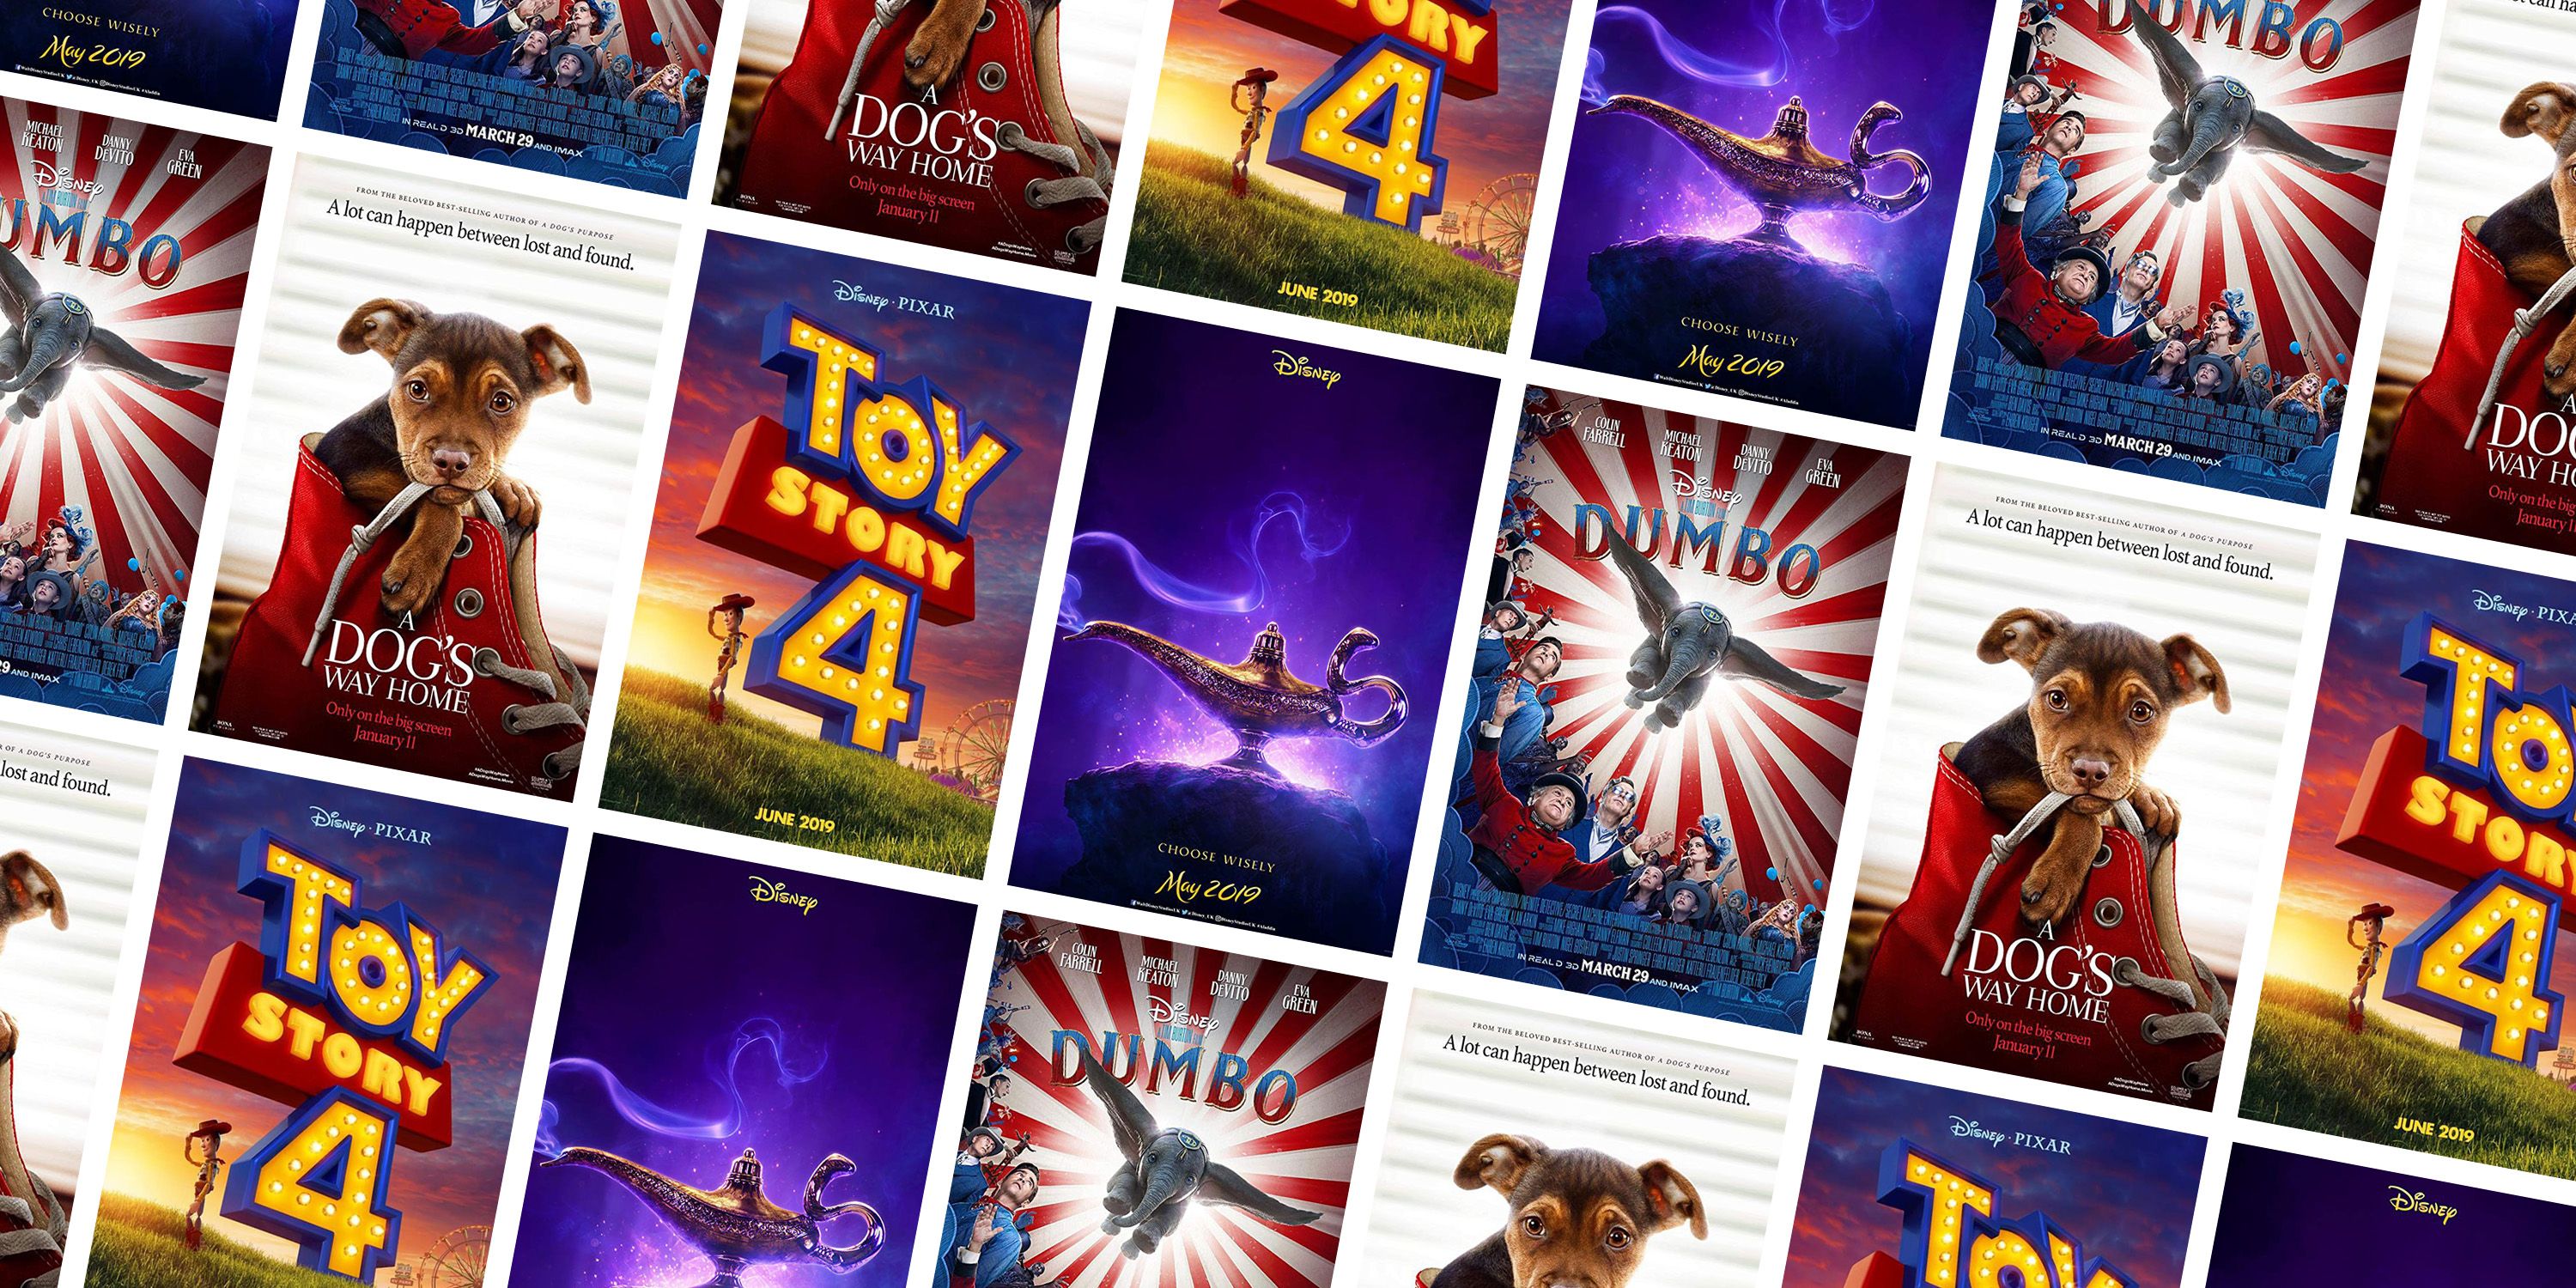 animation movies in theaters now